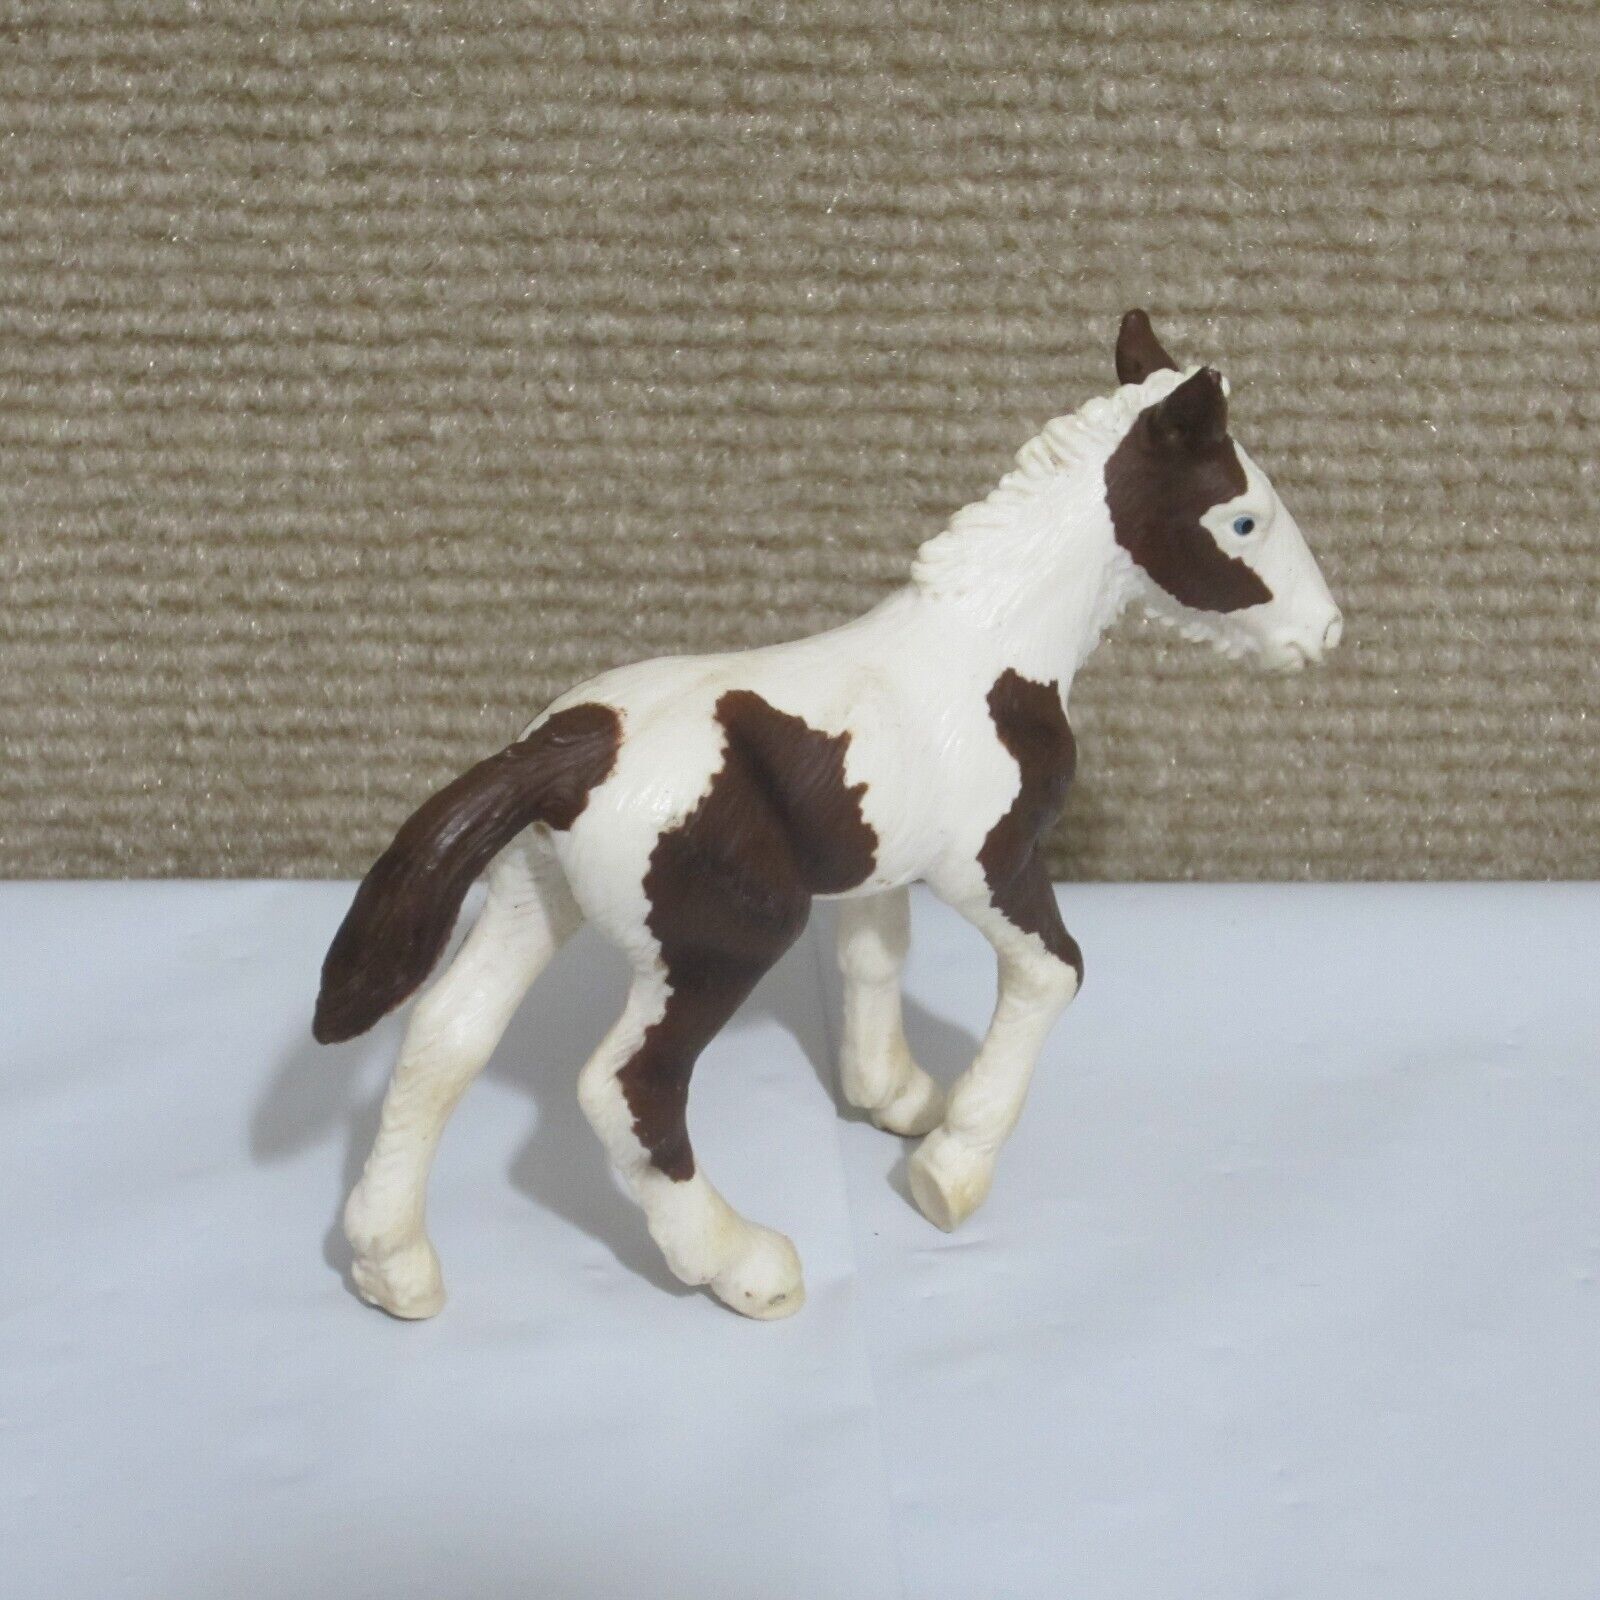 Schleich Tinker Foal Horse Animal Figure 2004 White Brown